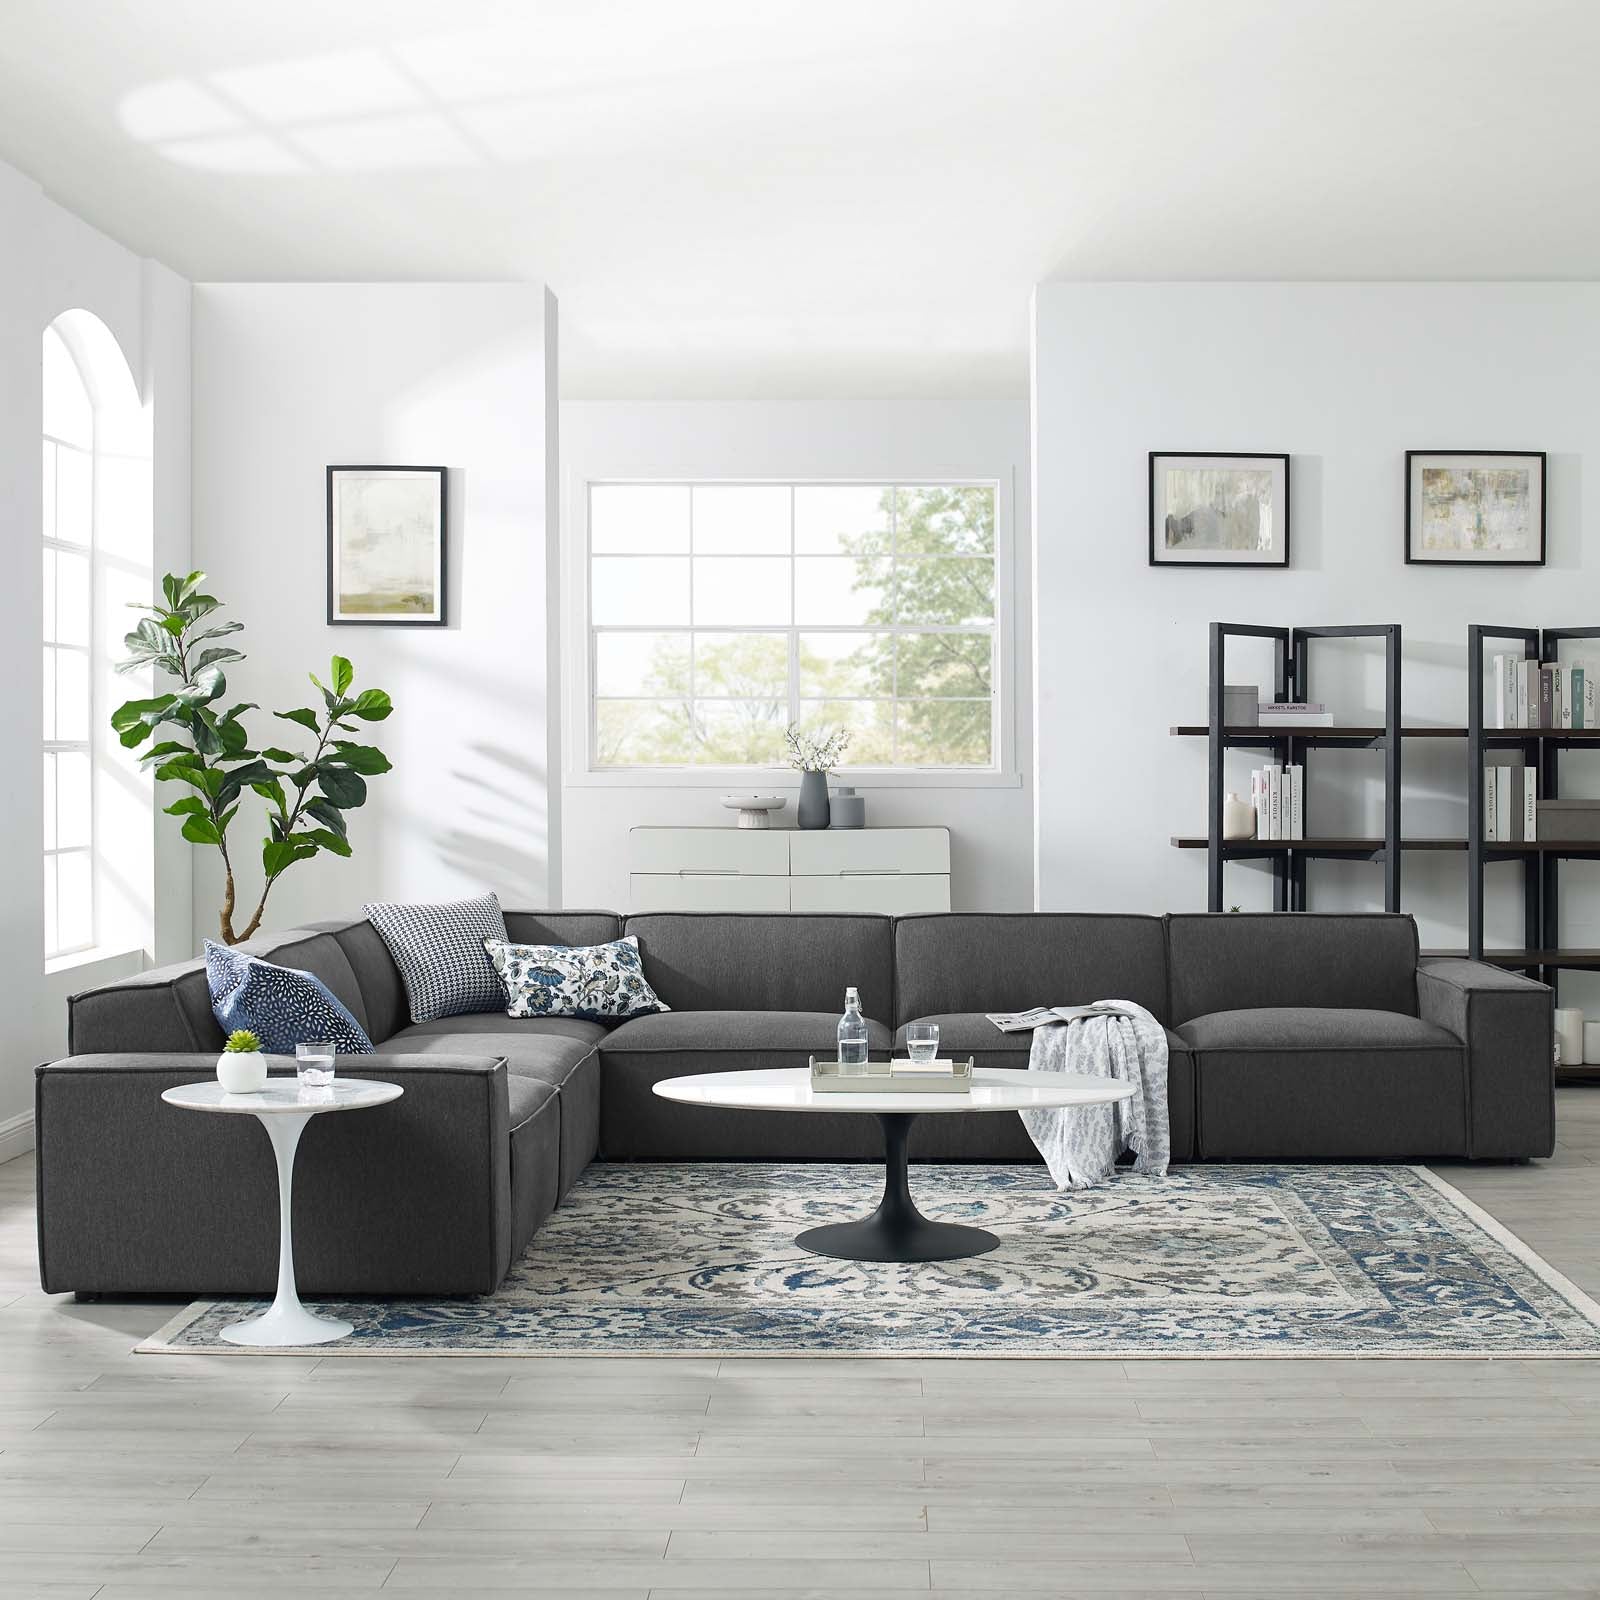 Modway Sectional Sofas - Restore 6-Piece Sectional Sofa Charcoal